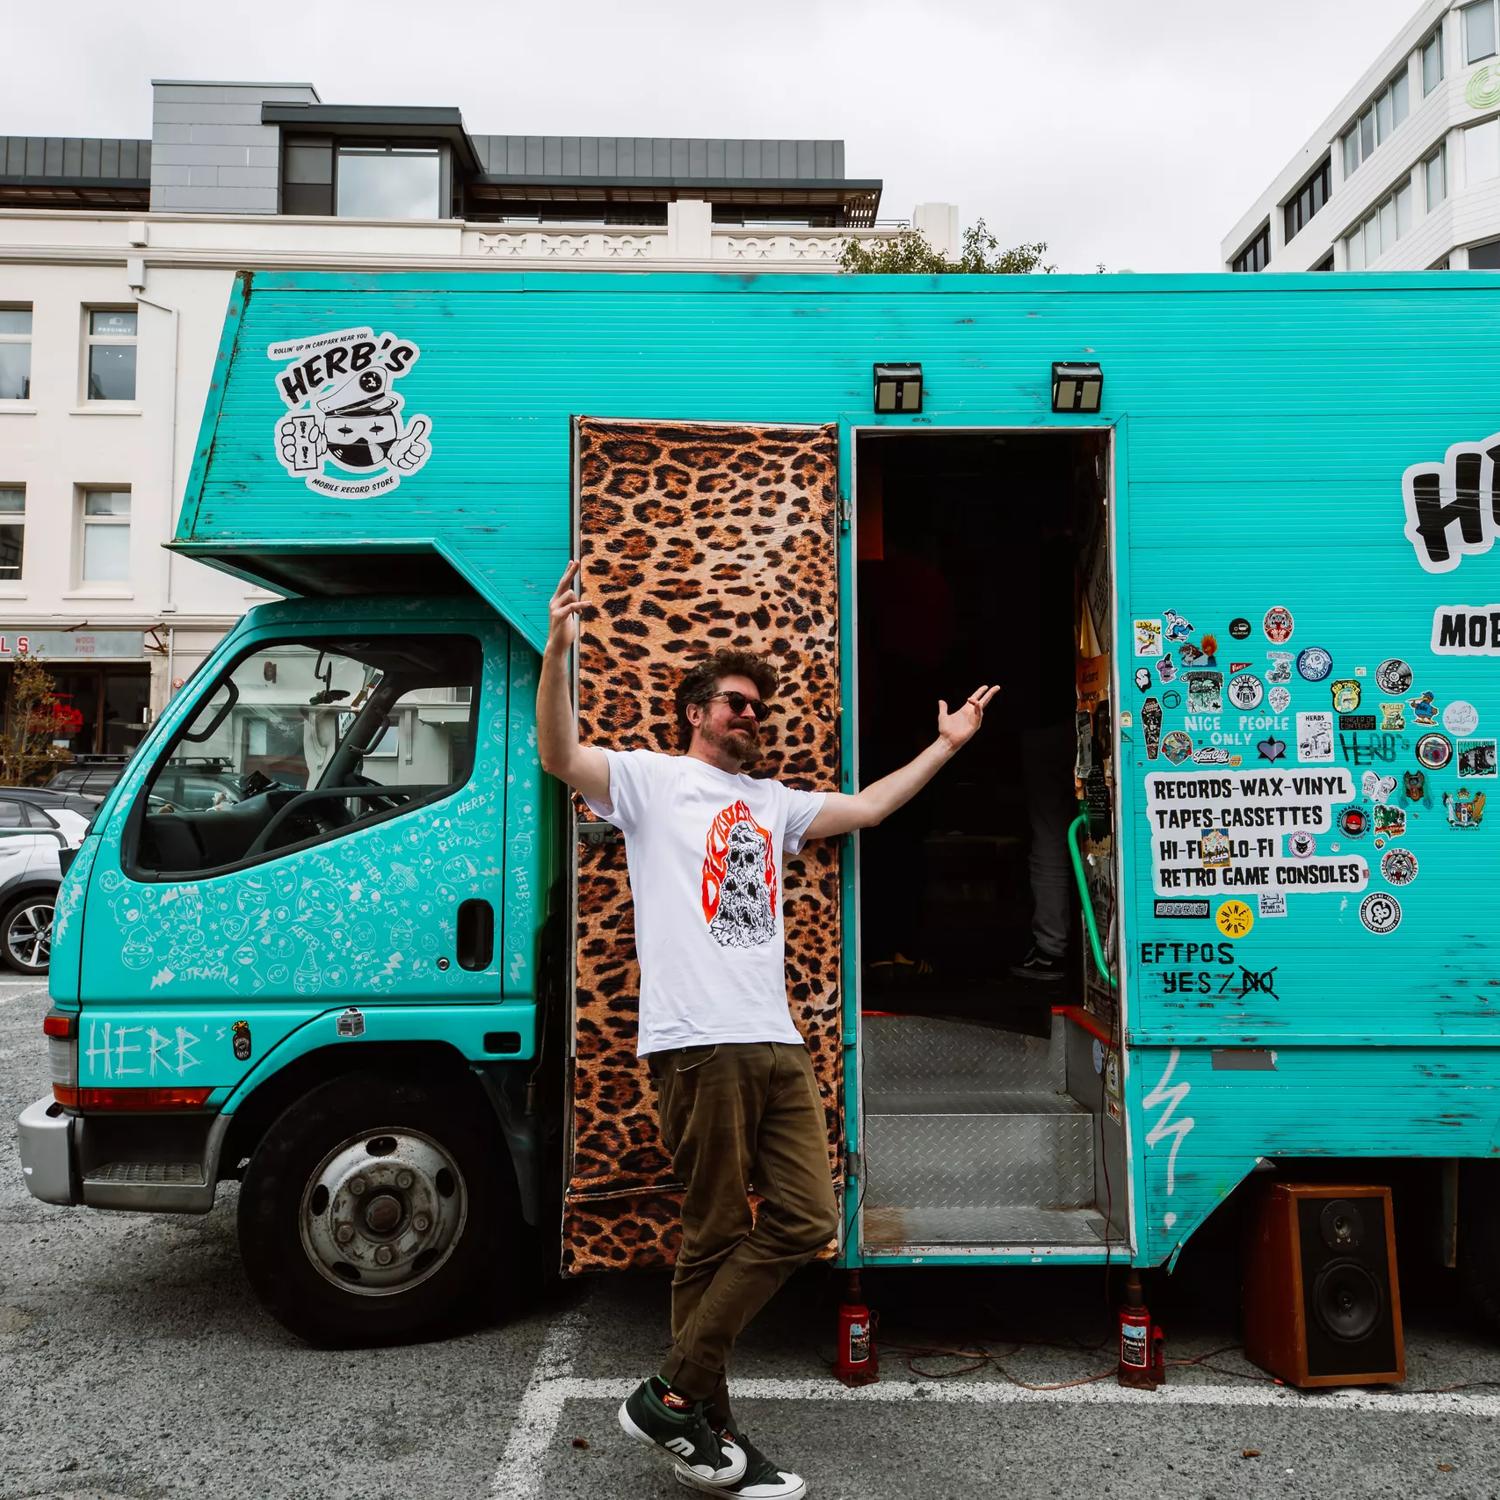 Ben James, owner of Herb's Mobile Record Store, stands outside his 2004 Mitsubishi Canter truck. The moving record shop is painted blue-green and decorated with stickers.